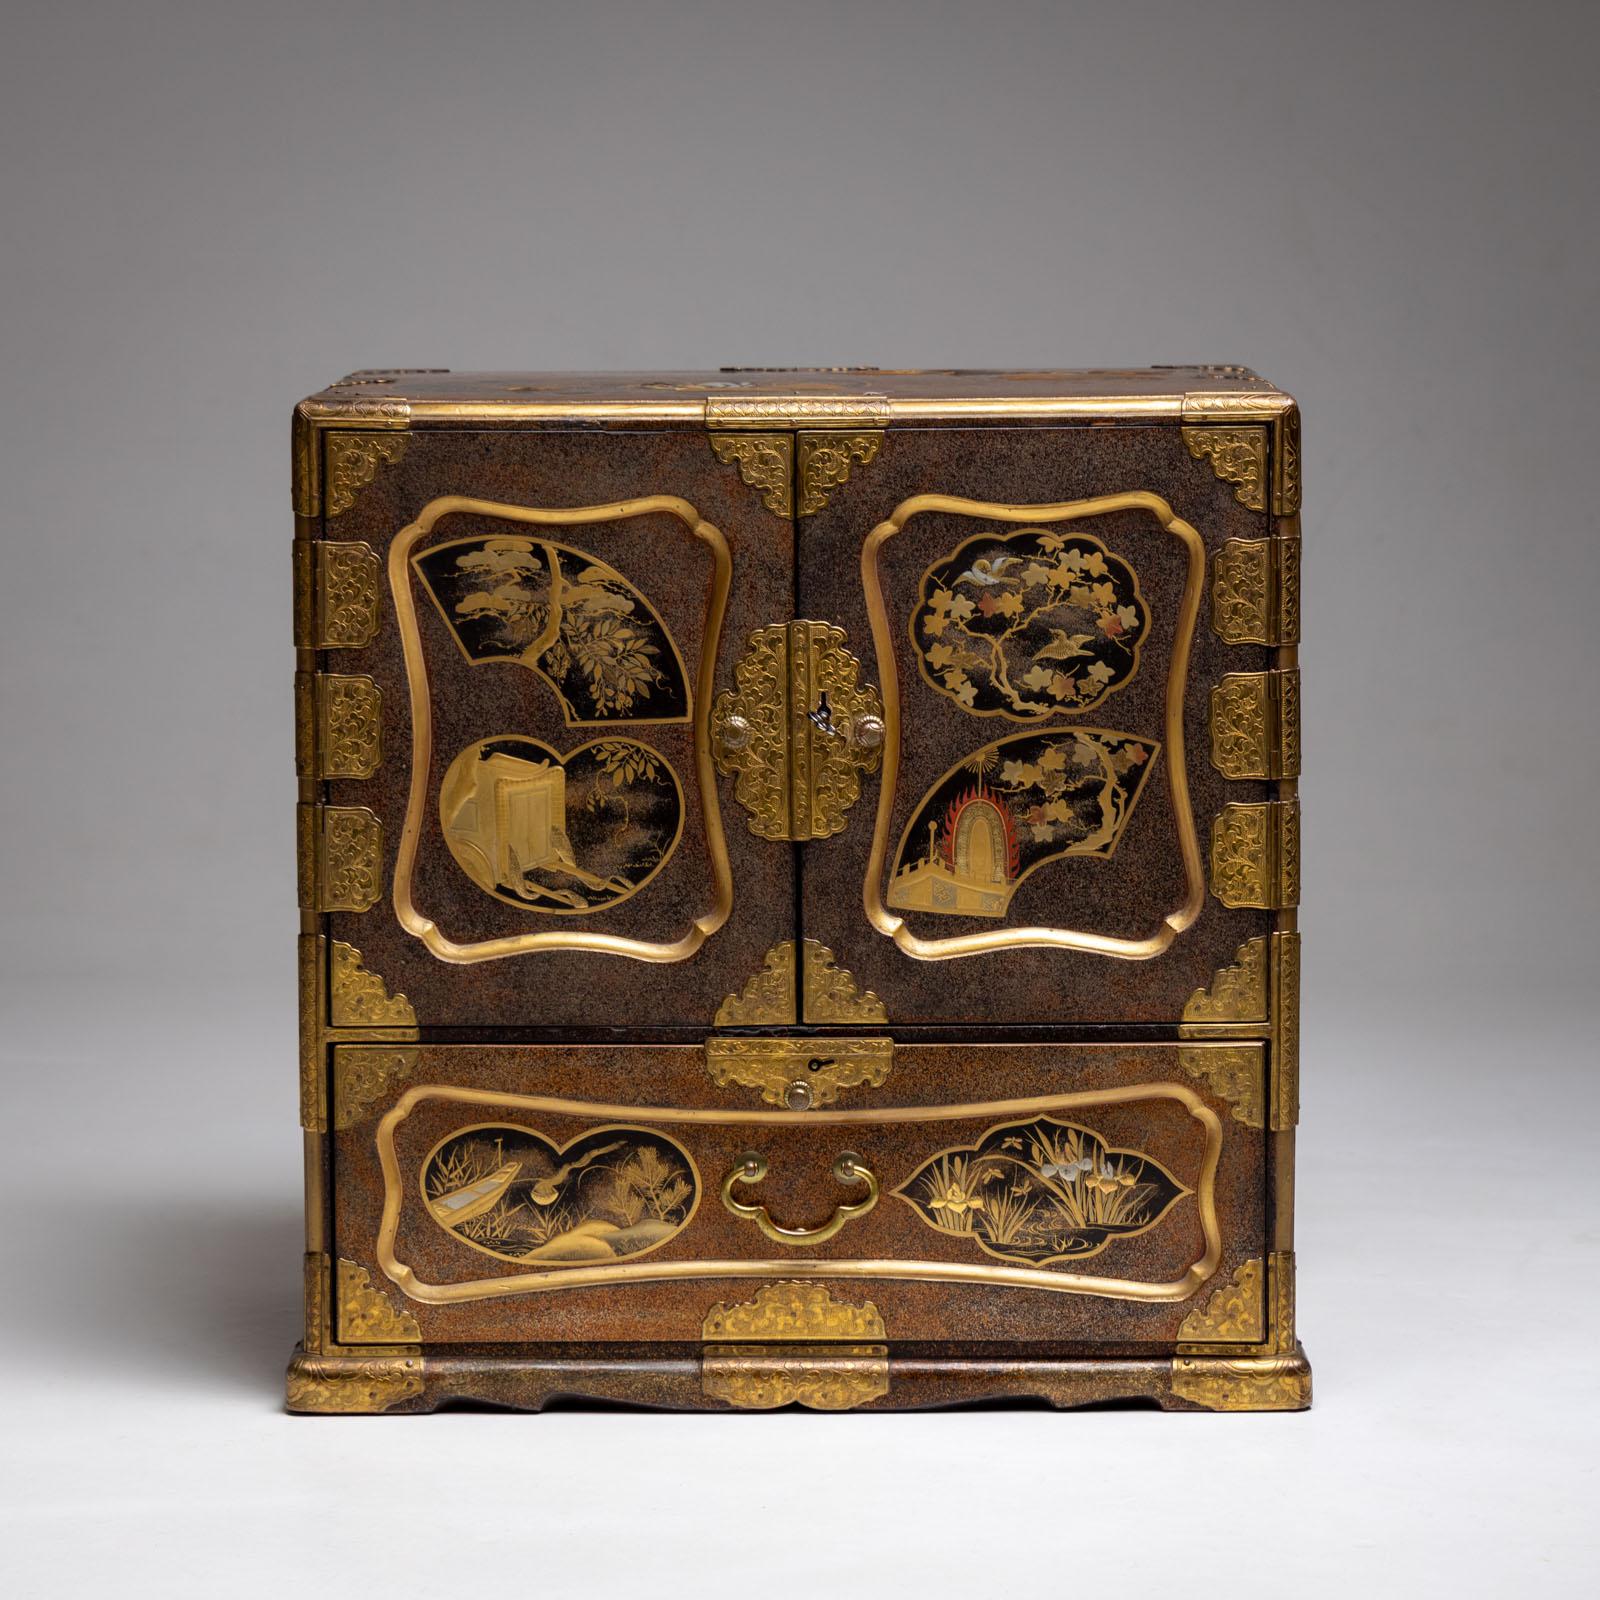 Small Japanese lacquer cabinet from the Meiji period with two doors and a drawer as well as side handles. The cabinet is decorated with gold lacquer decor (hiramakie) in the form of trees, landscapes, a carriage, a tent and small birds. The top